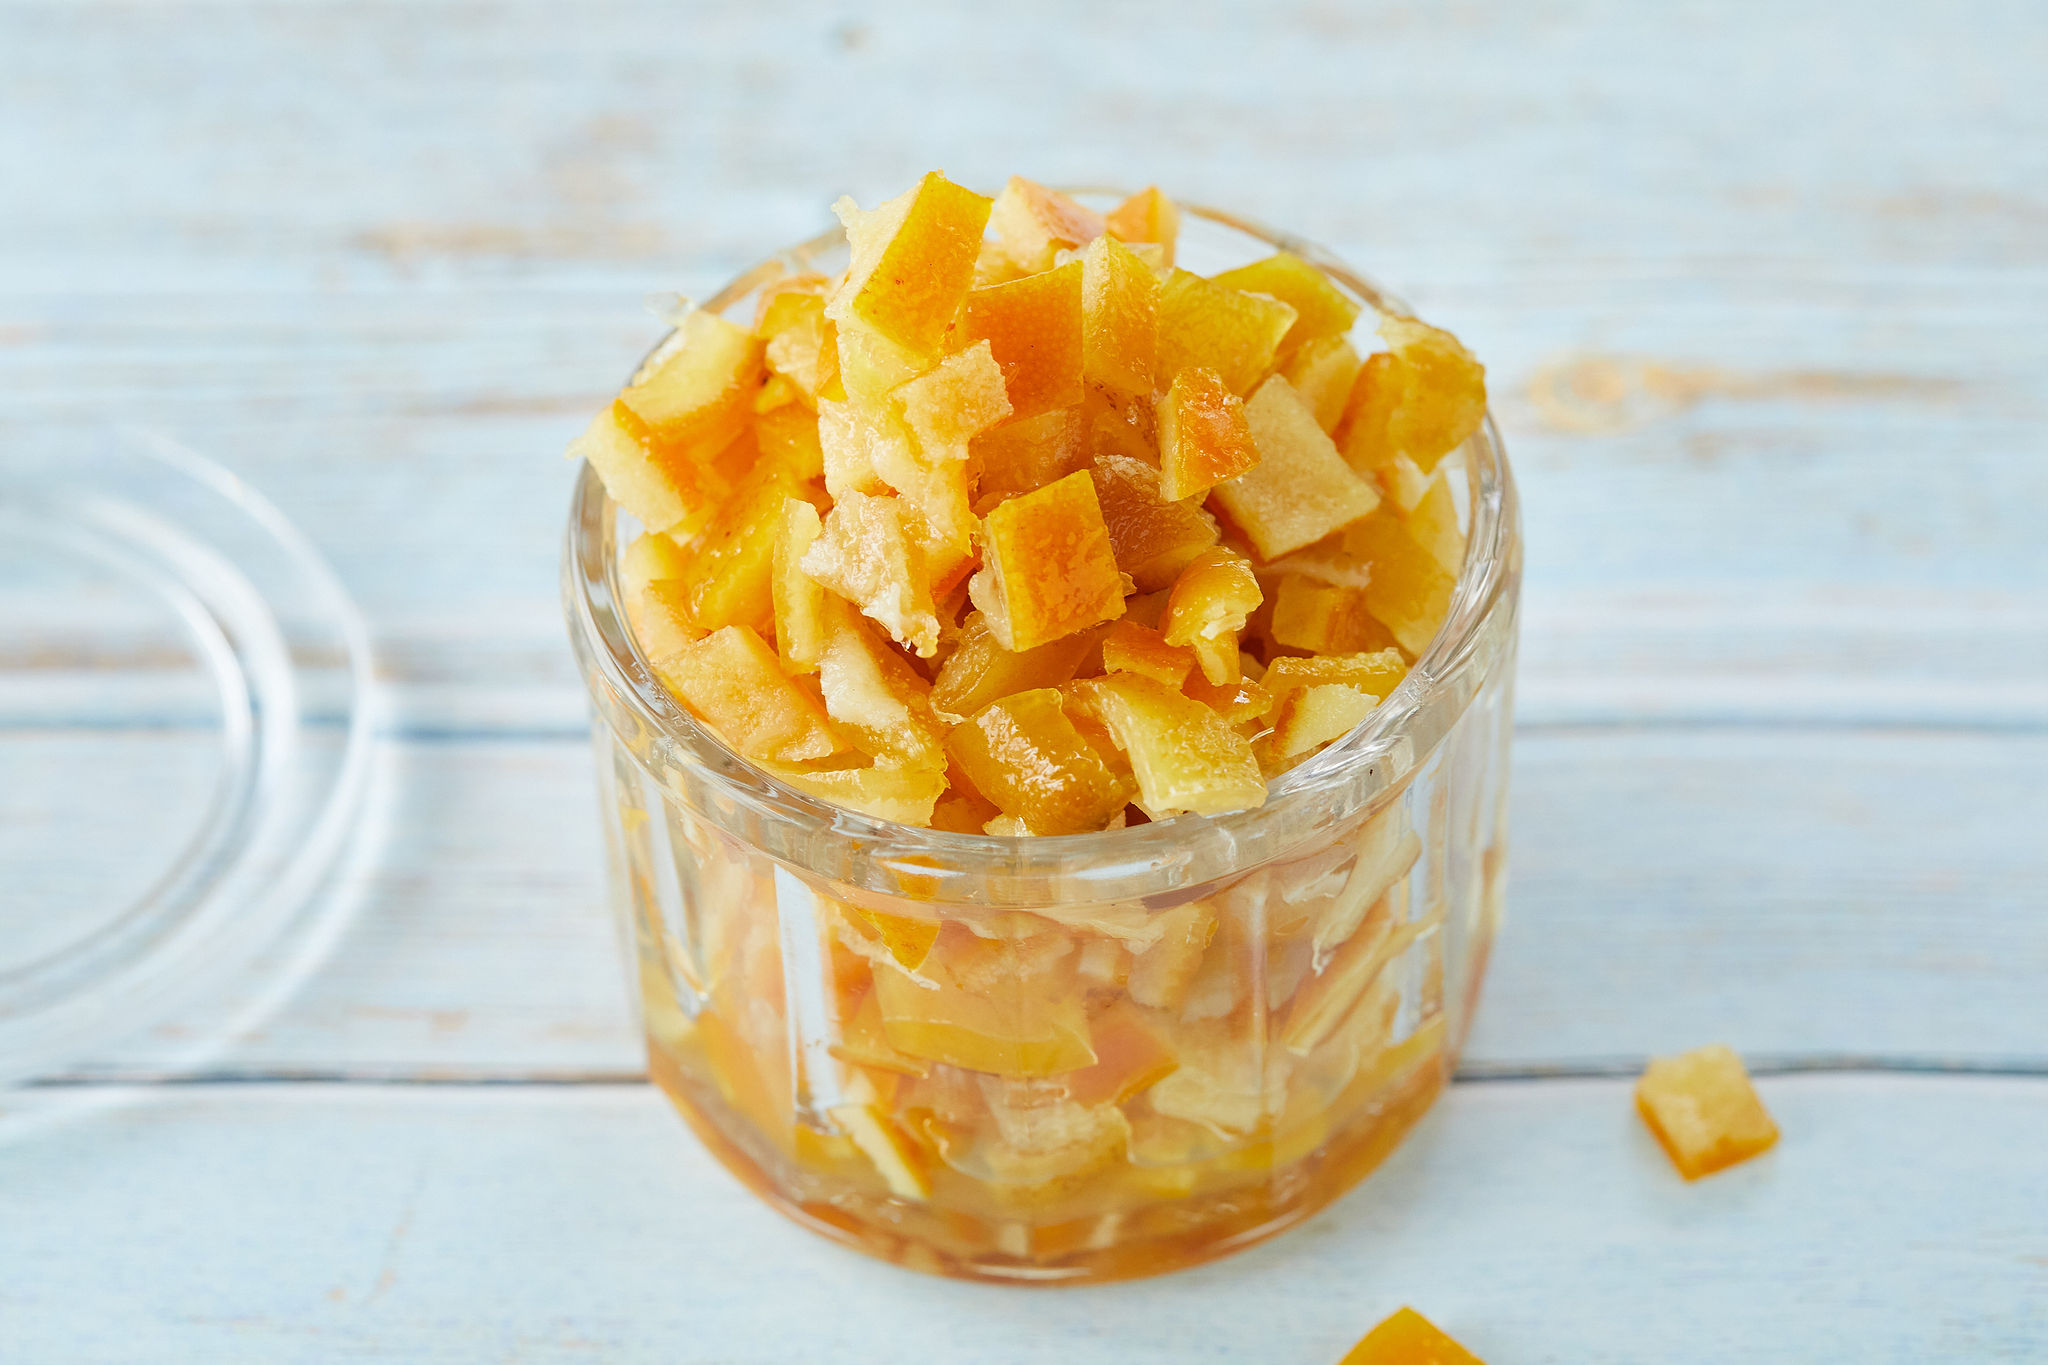 A jar of candied mixed peel using lemons and oranges.